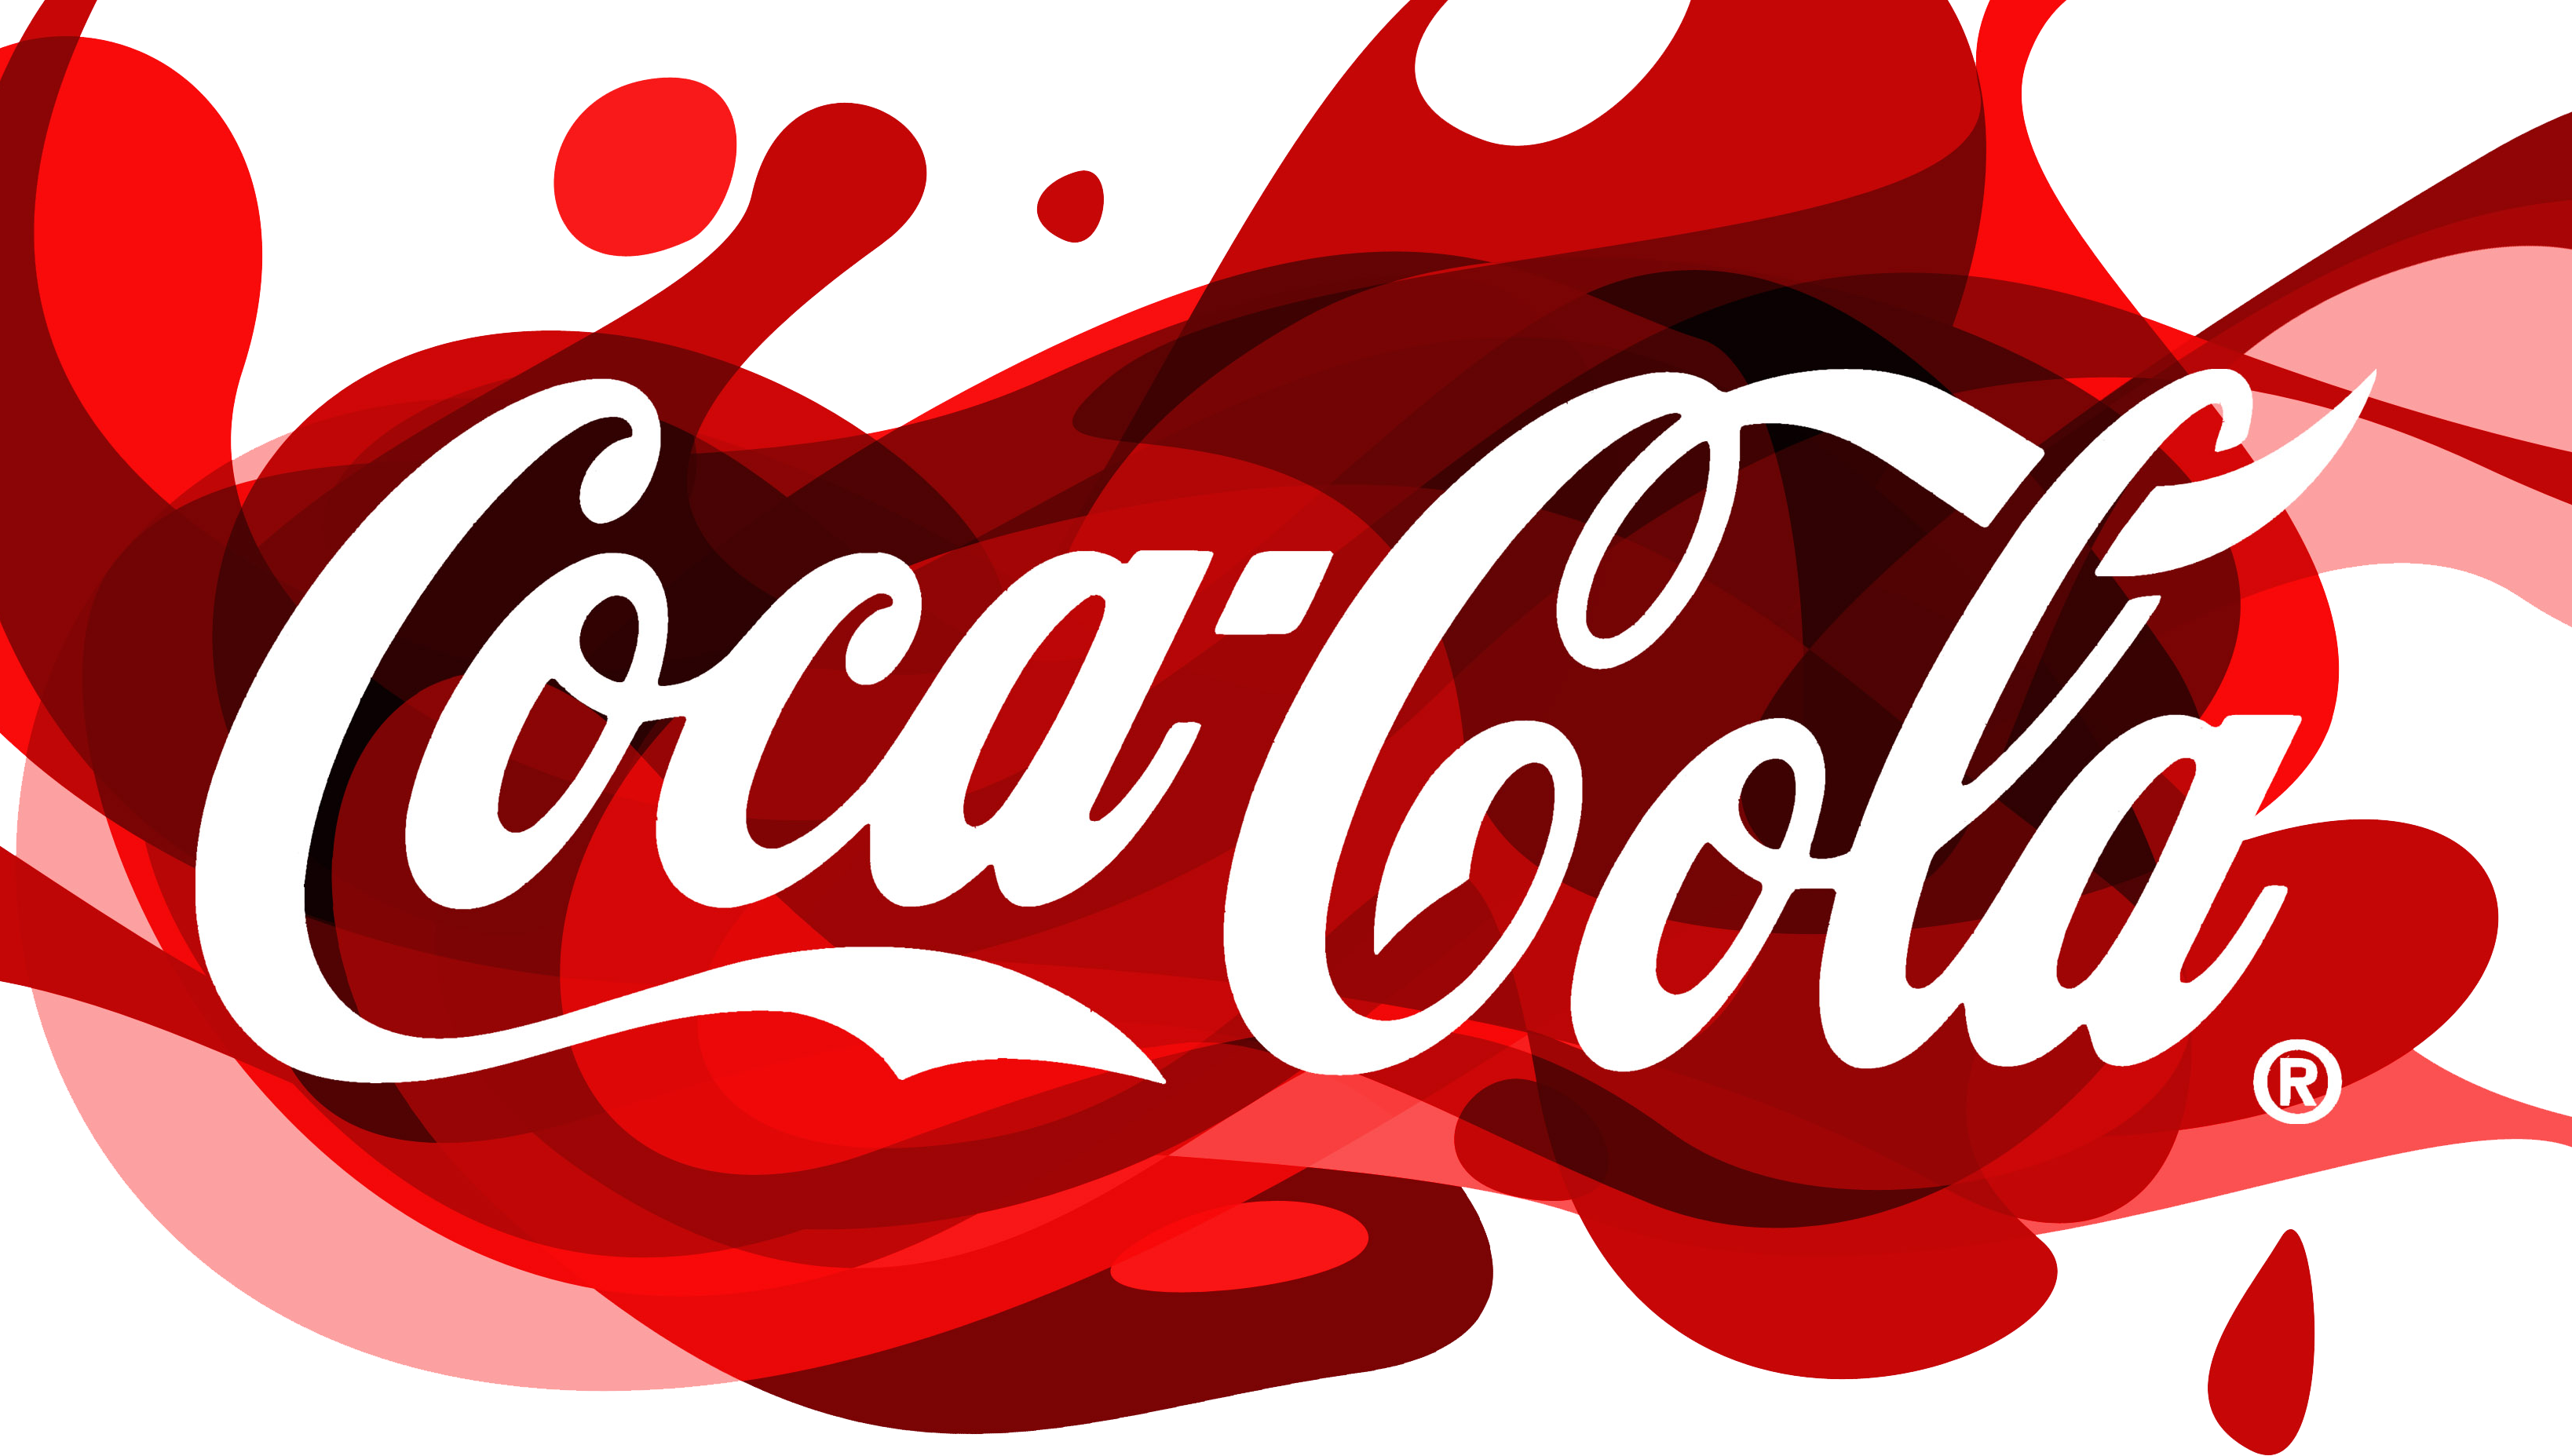 Coca Cola Text Logo Png Transparent Background Free Download 41683 Freeiconspng